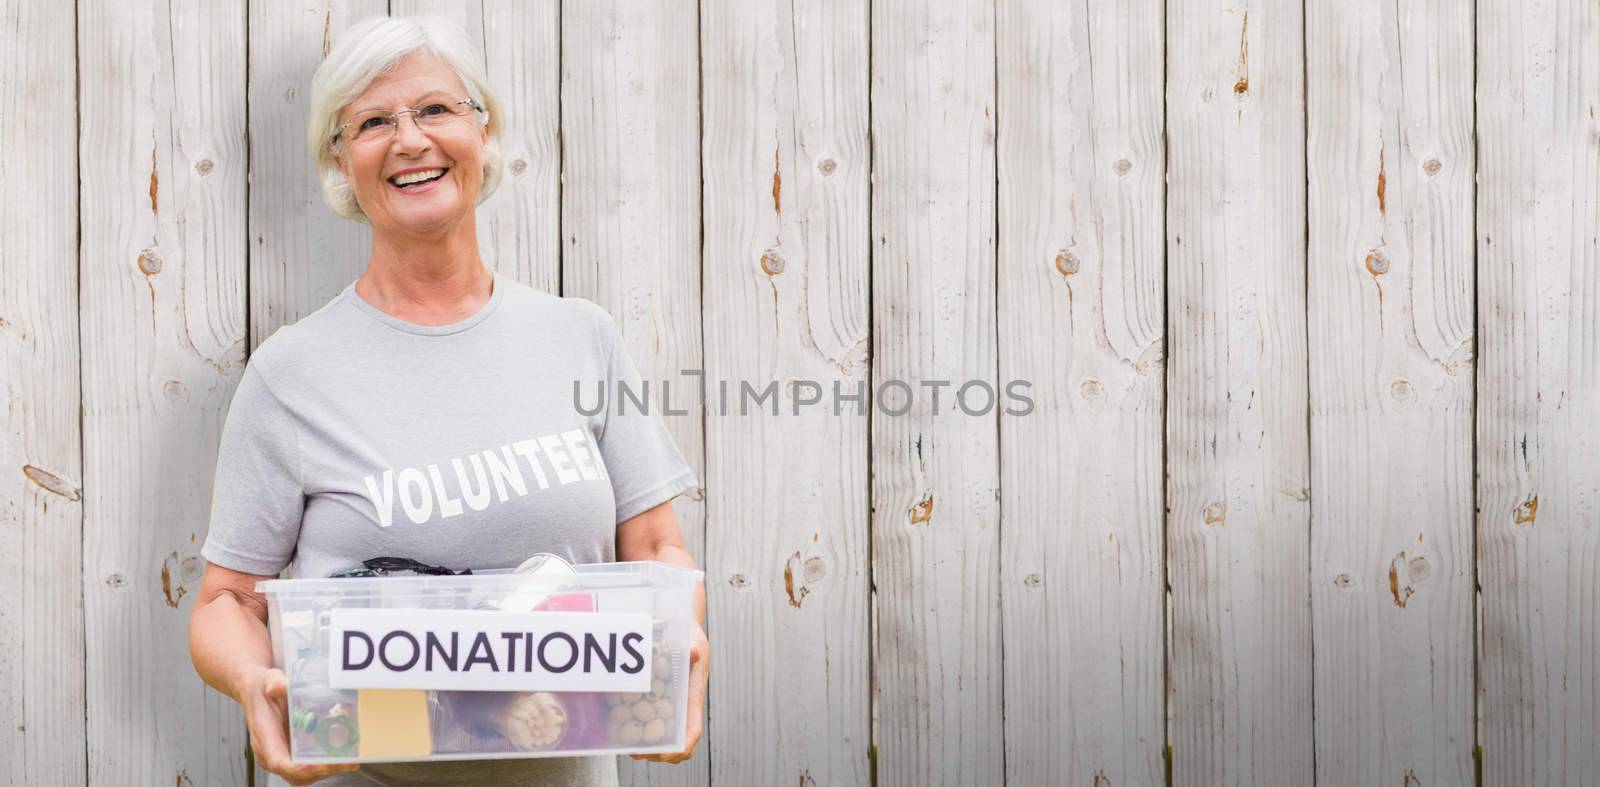 Happy grandmother holding donation box against wooden background